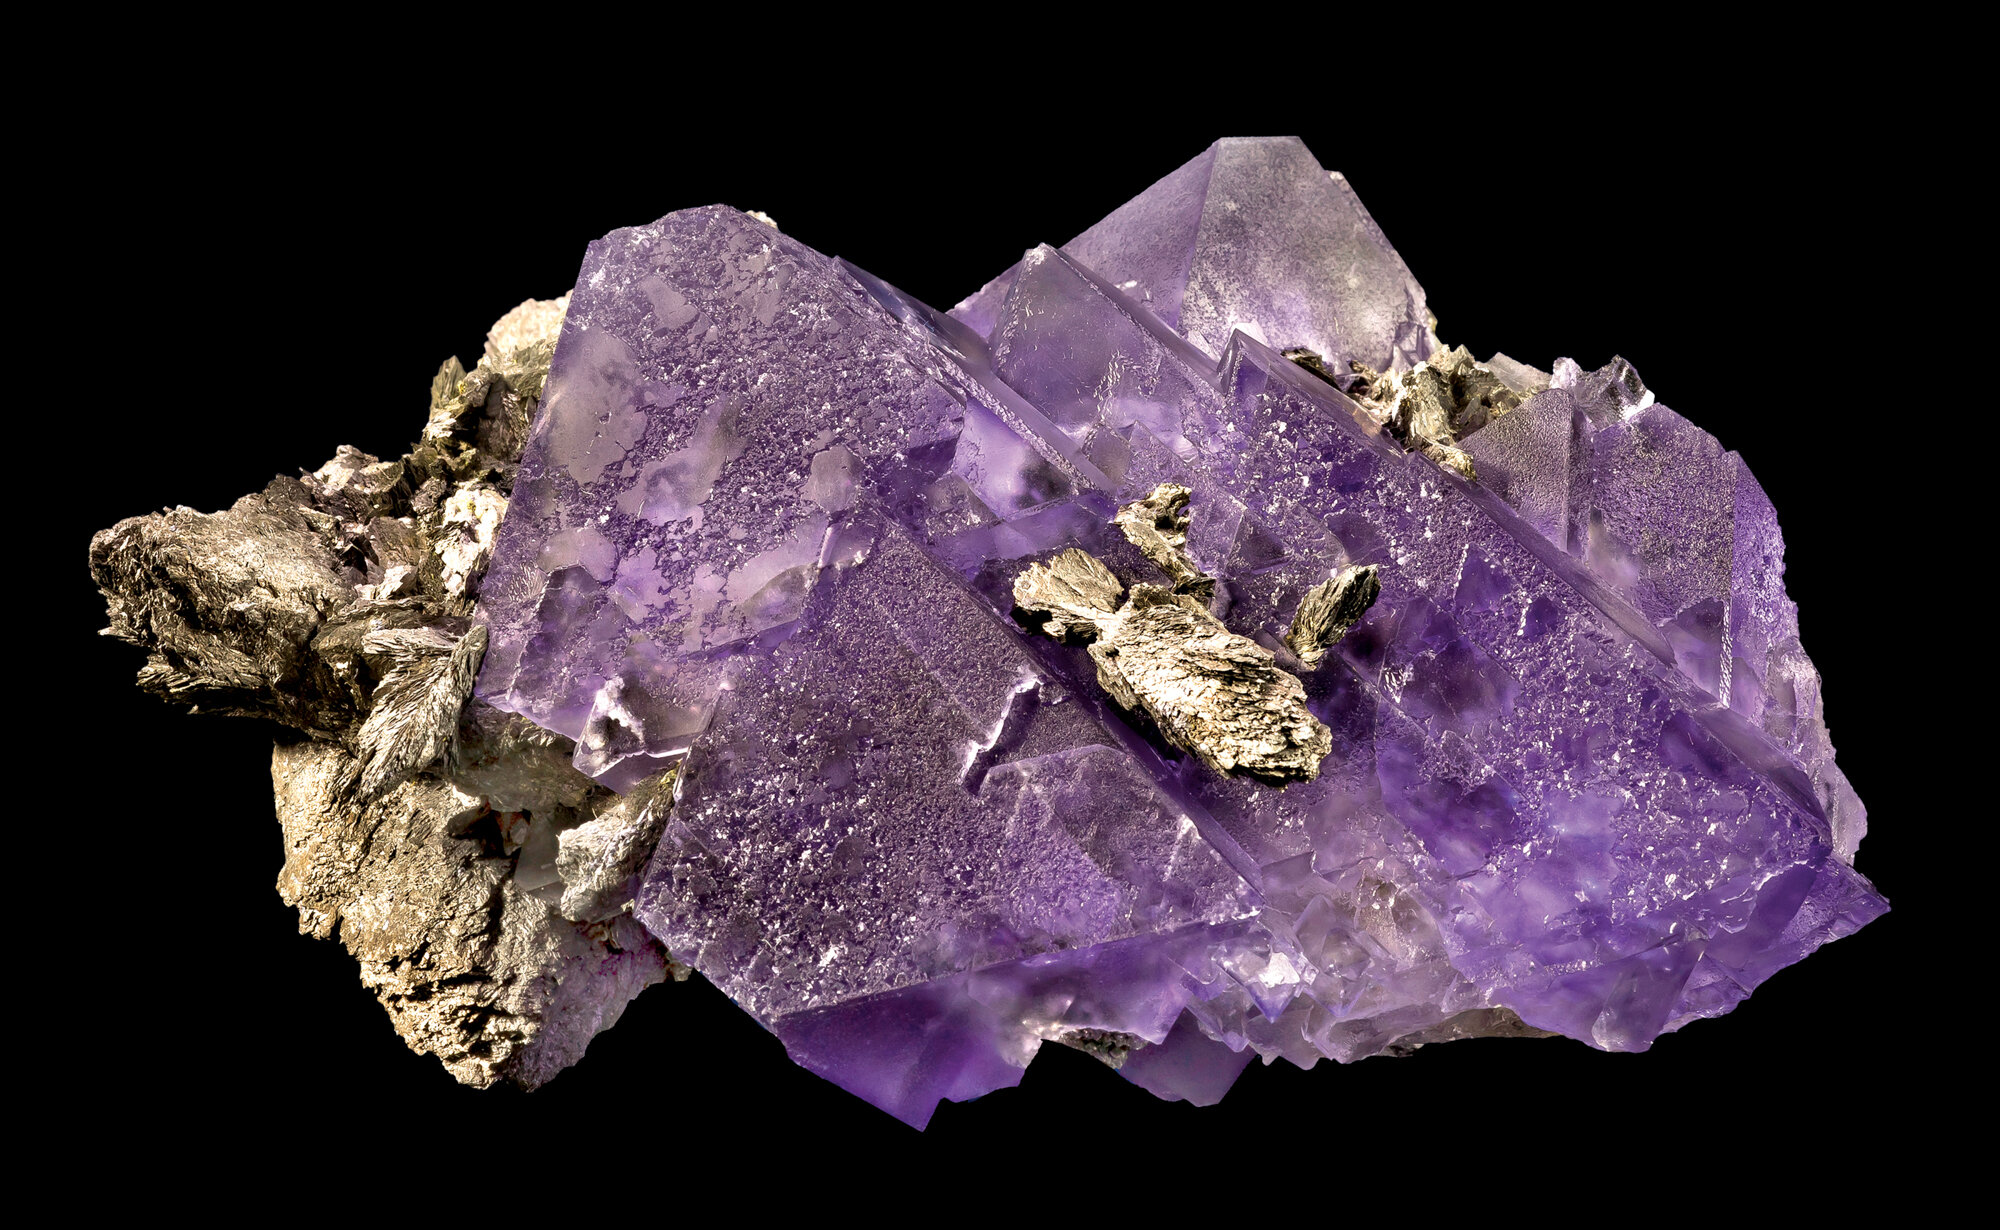  Fluorite with löllingite, 13 cm, Huanggang mine No. 1, Keshiketeng County, Chifeng Prefecture, Inner Mongolia Autonomous Region, China. Found in 2012. 